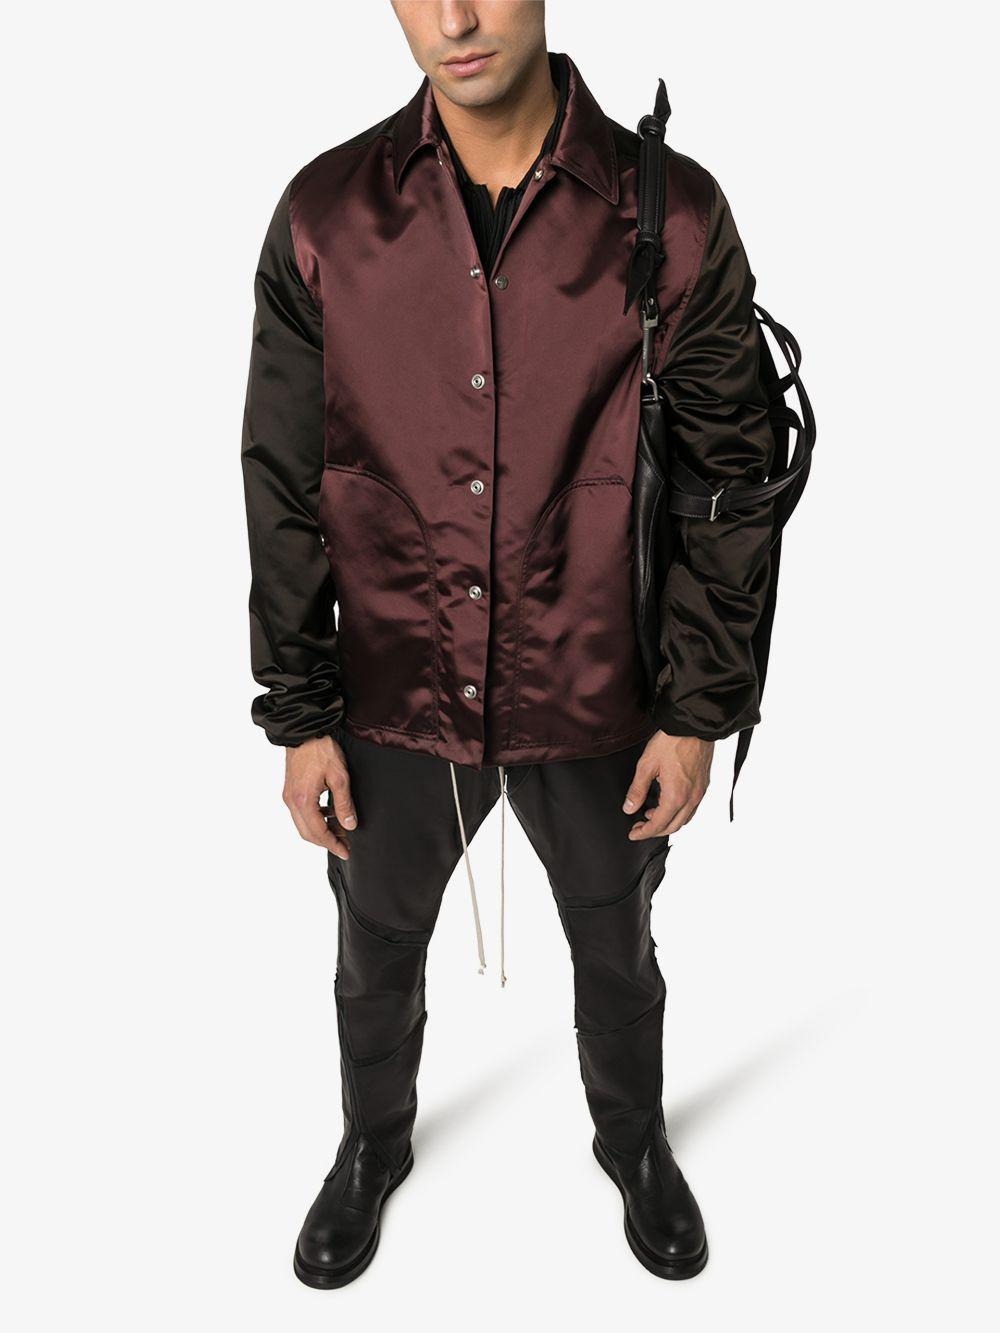 Rick Owens Synthetic Bauhaus Bomber Jacket in Purple for Men - Lyst